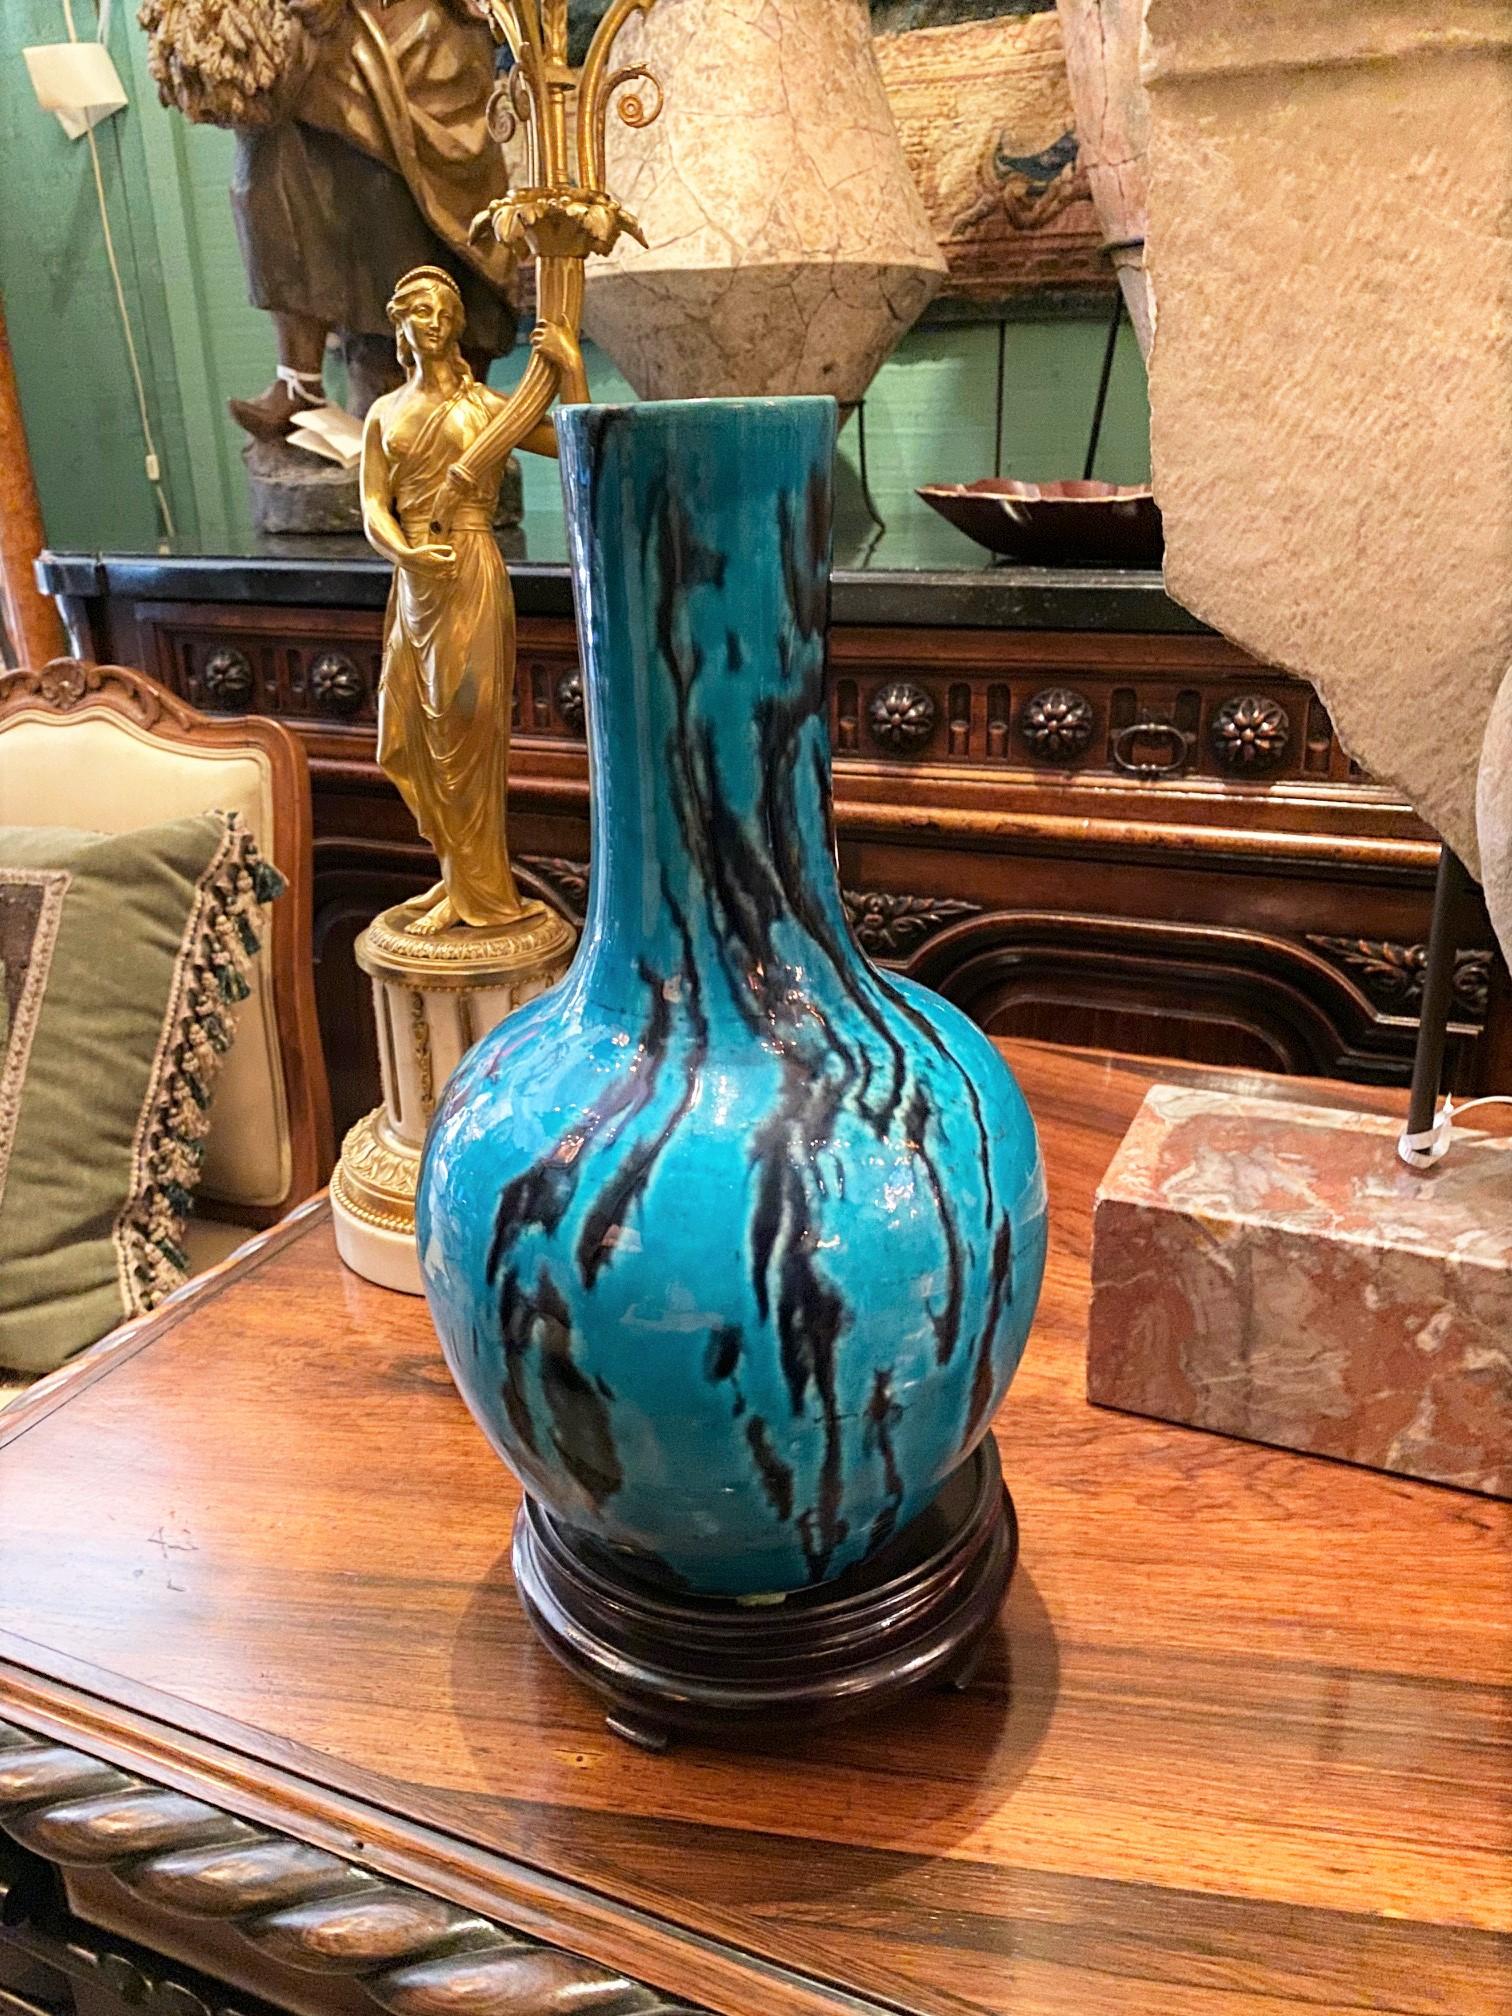 A very Fine 18th century Chinese chinoiserie blue and pottery vase or jar bottle, of typical vasiform shape with medium and deep blue decoration. Hand painted in shades of cobalt blue. it comes with a hand carved wood base as a Stand. A Very nice